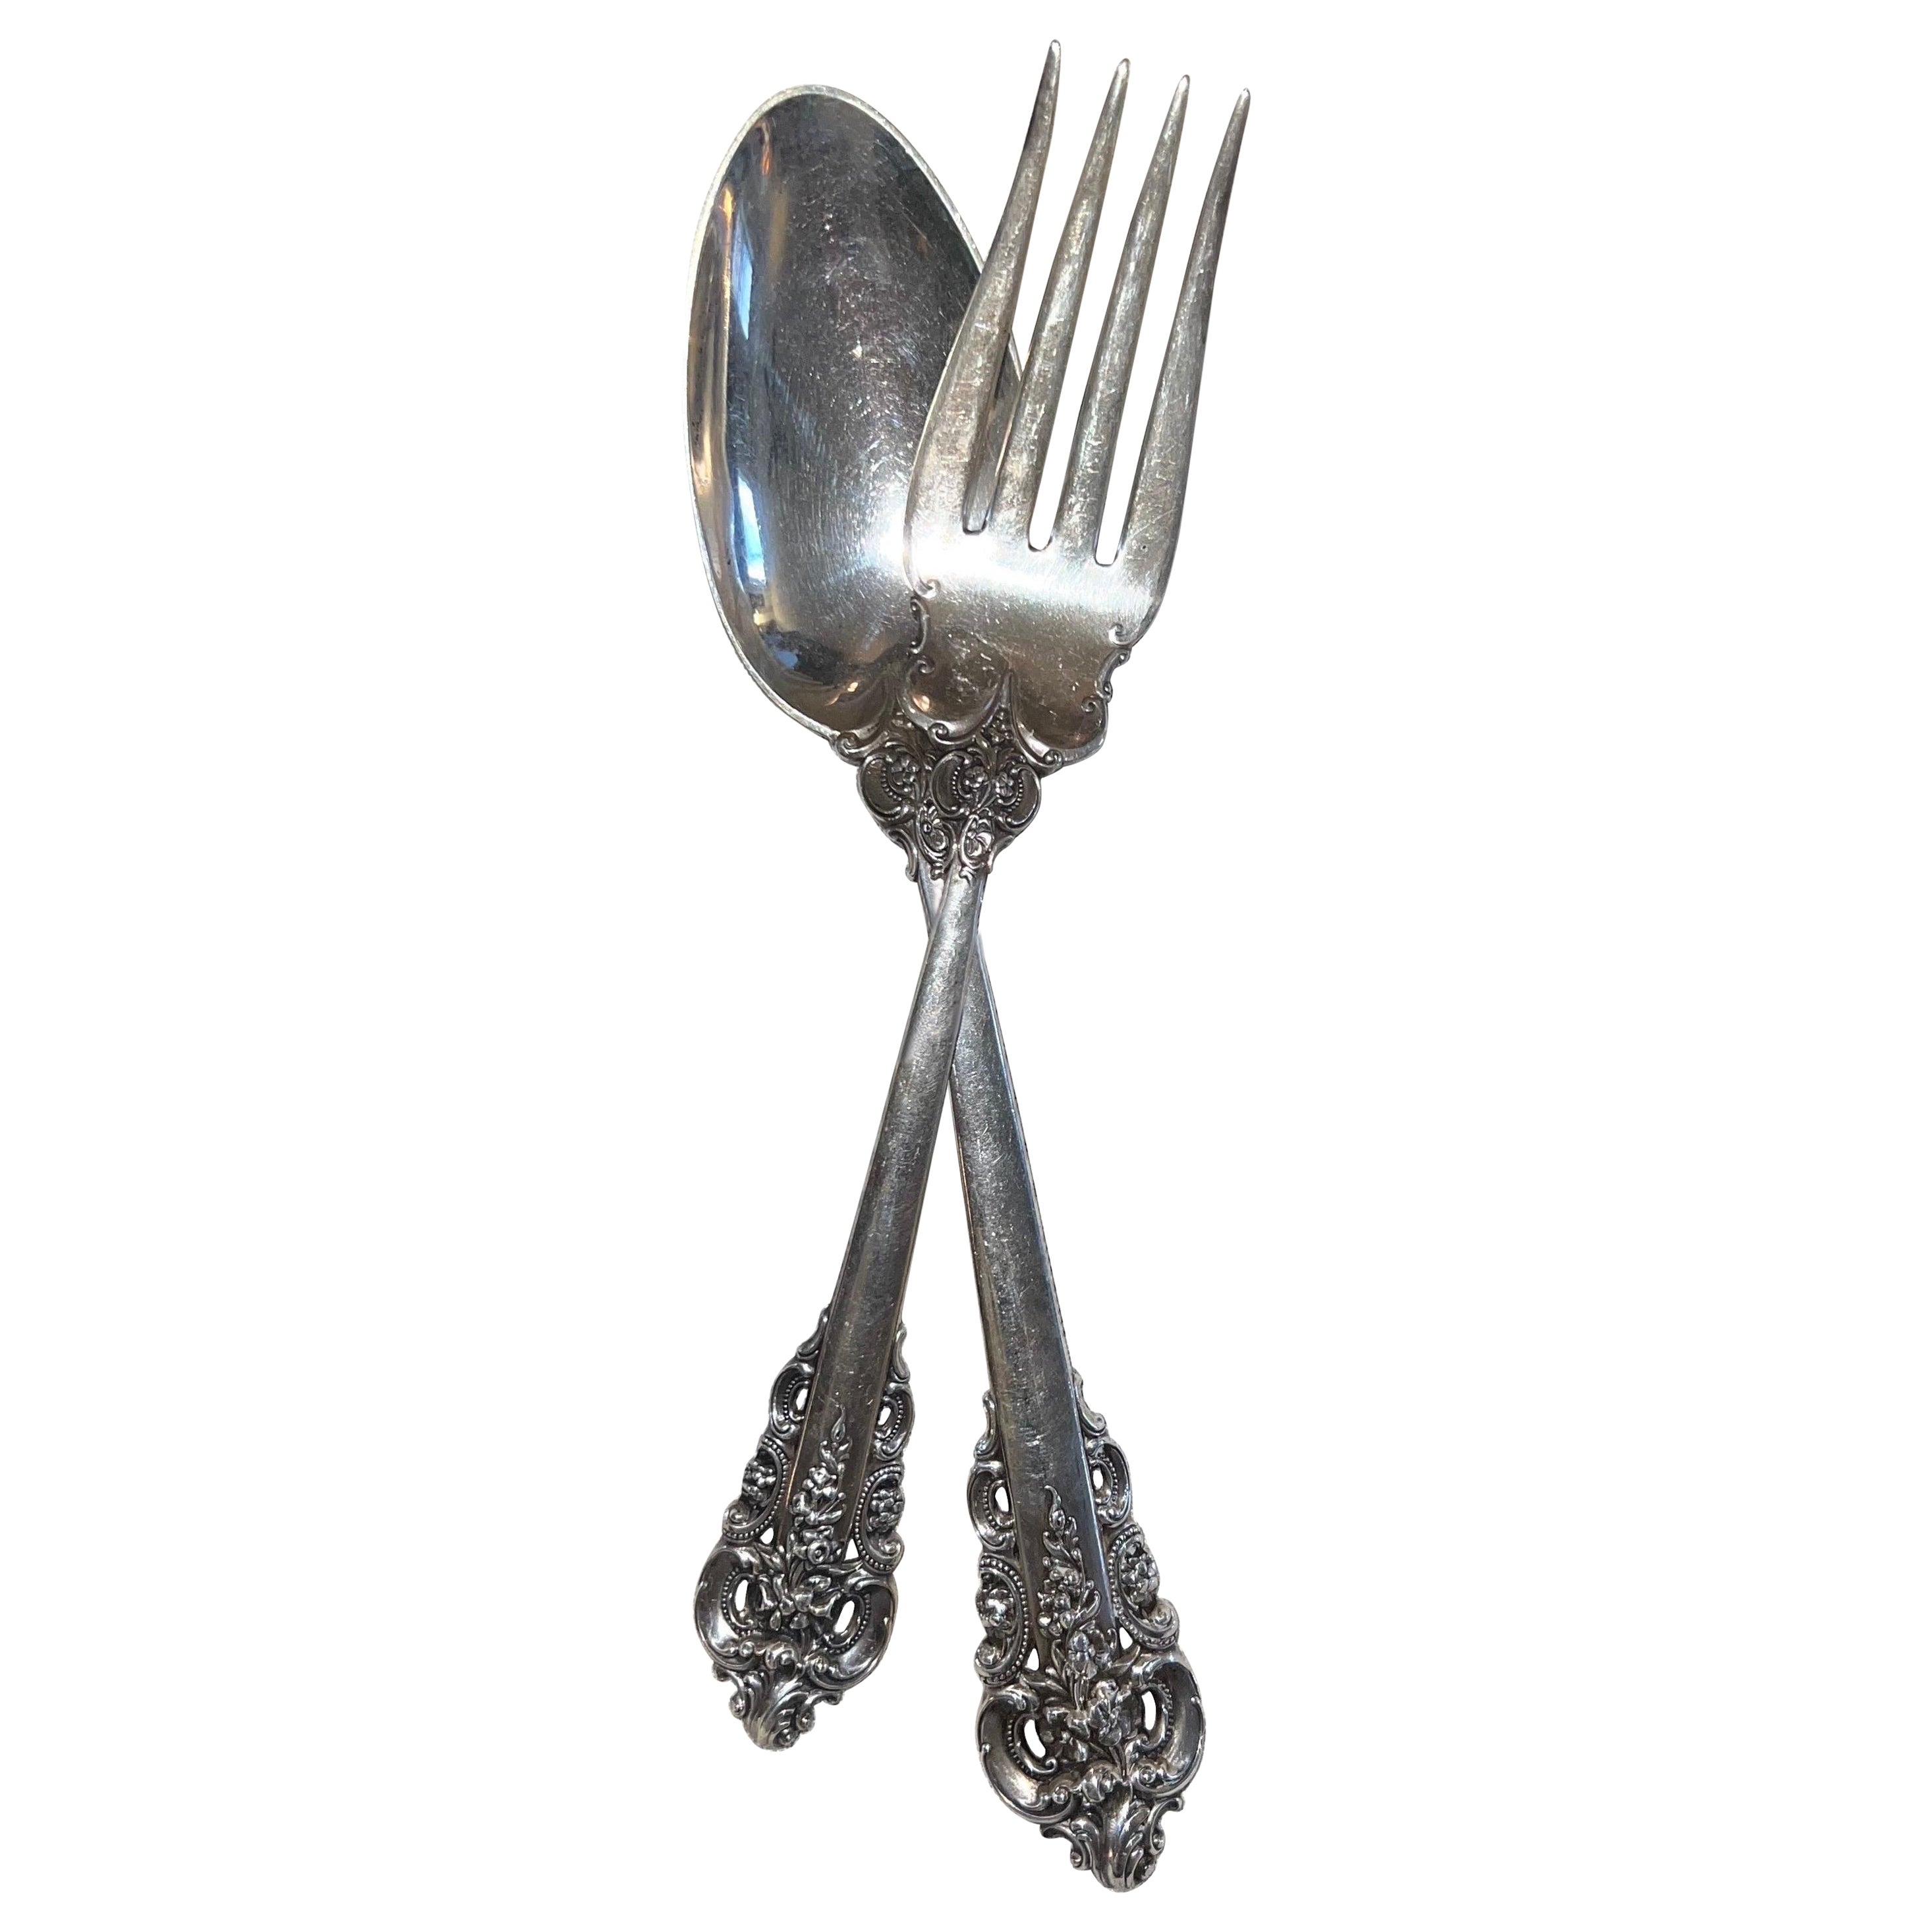 Wallace Sterling Silver Serving Fork & Spoon